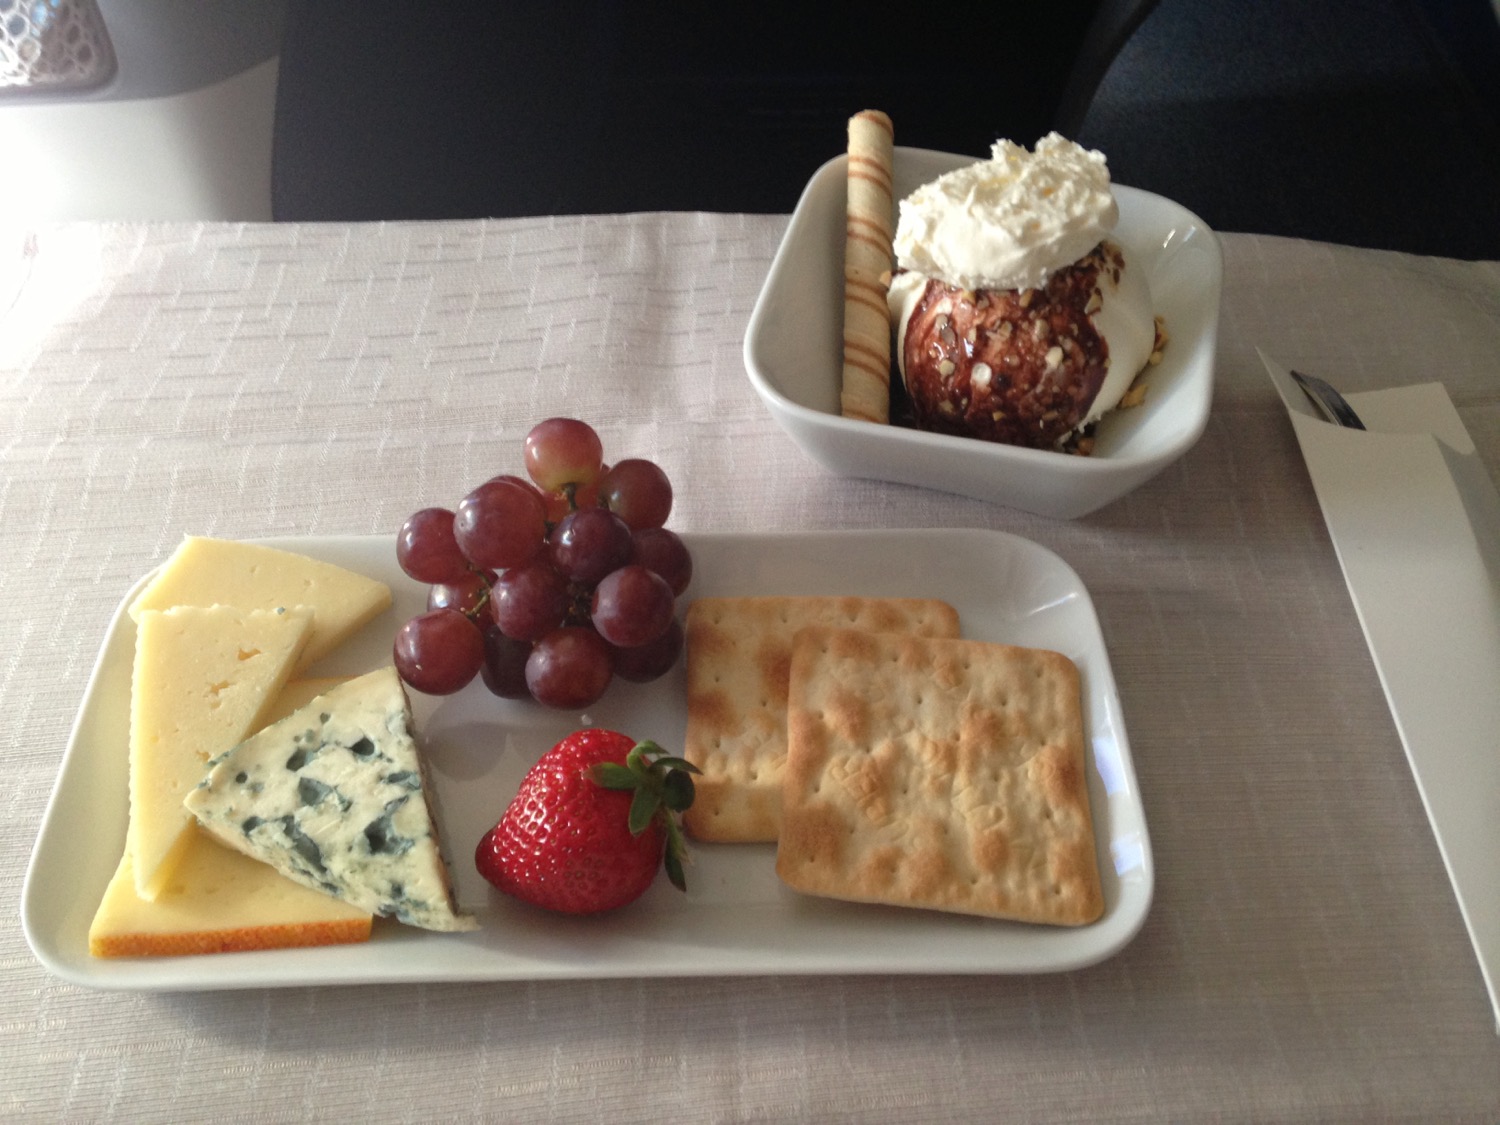 Delta One Business Class Meal - 11